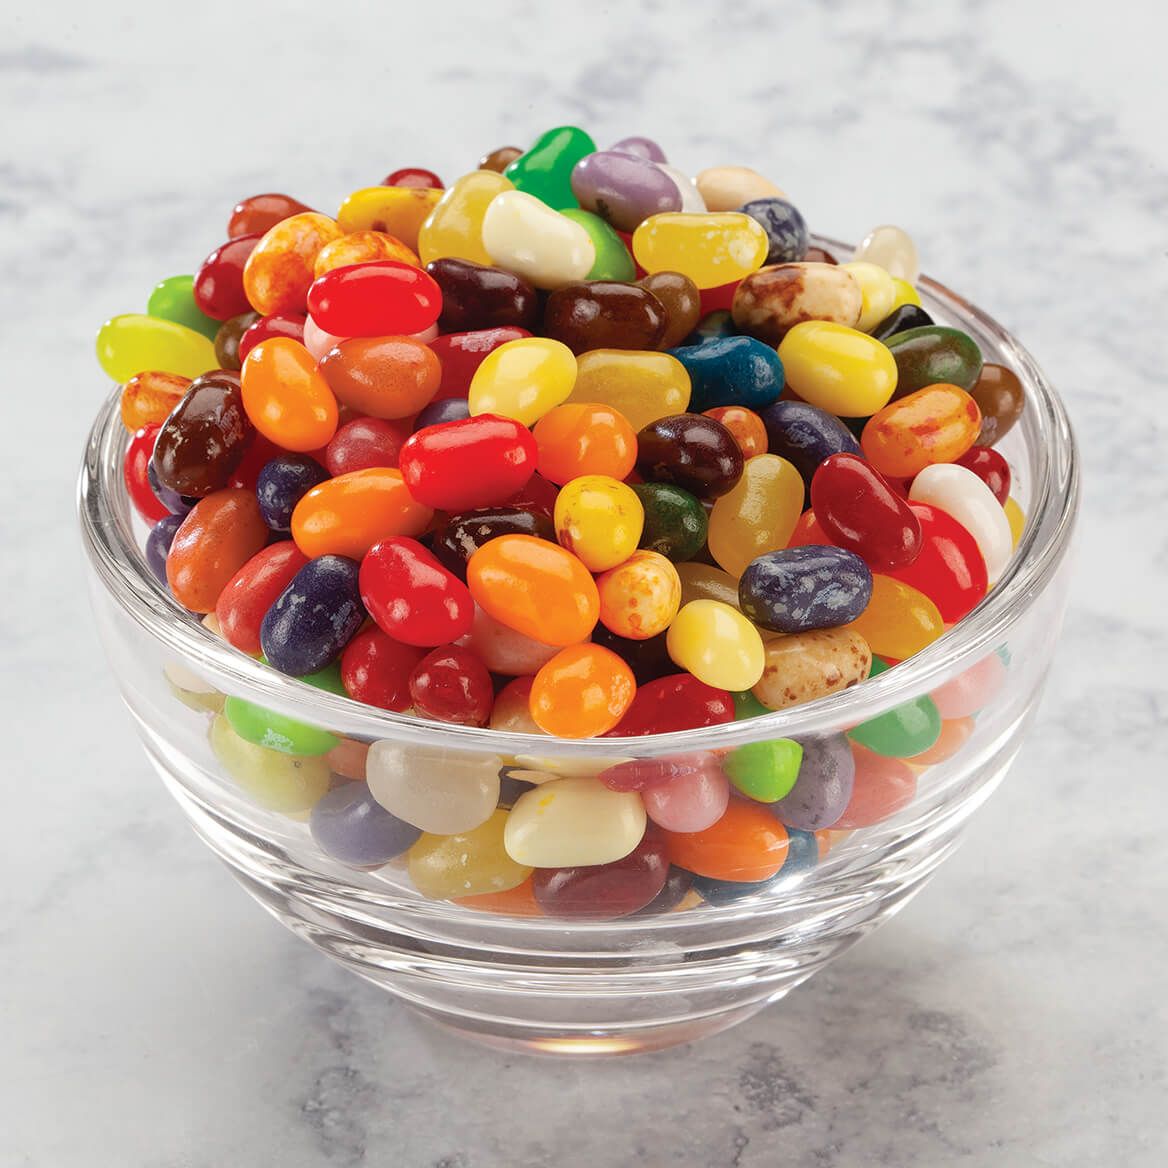 Jelly Belly® Gourmet Jelly Beans, 2 lbs. + '-' + 374445